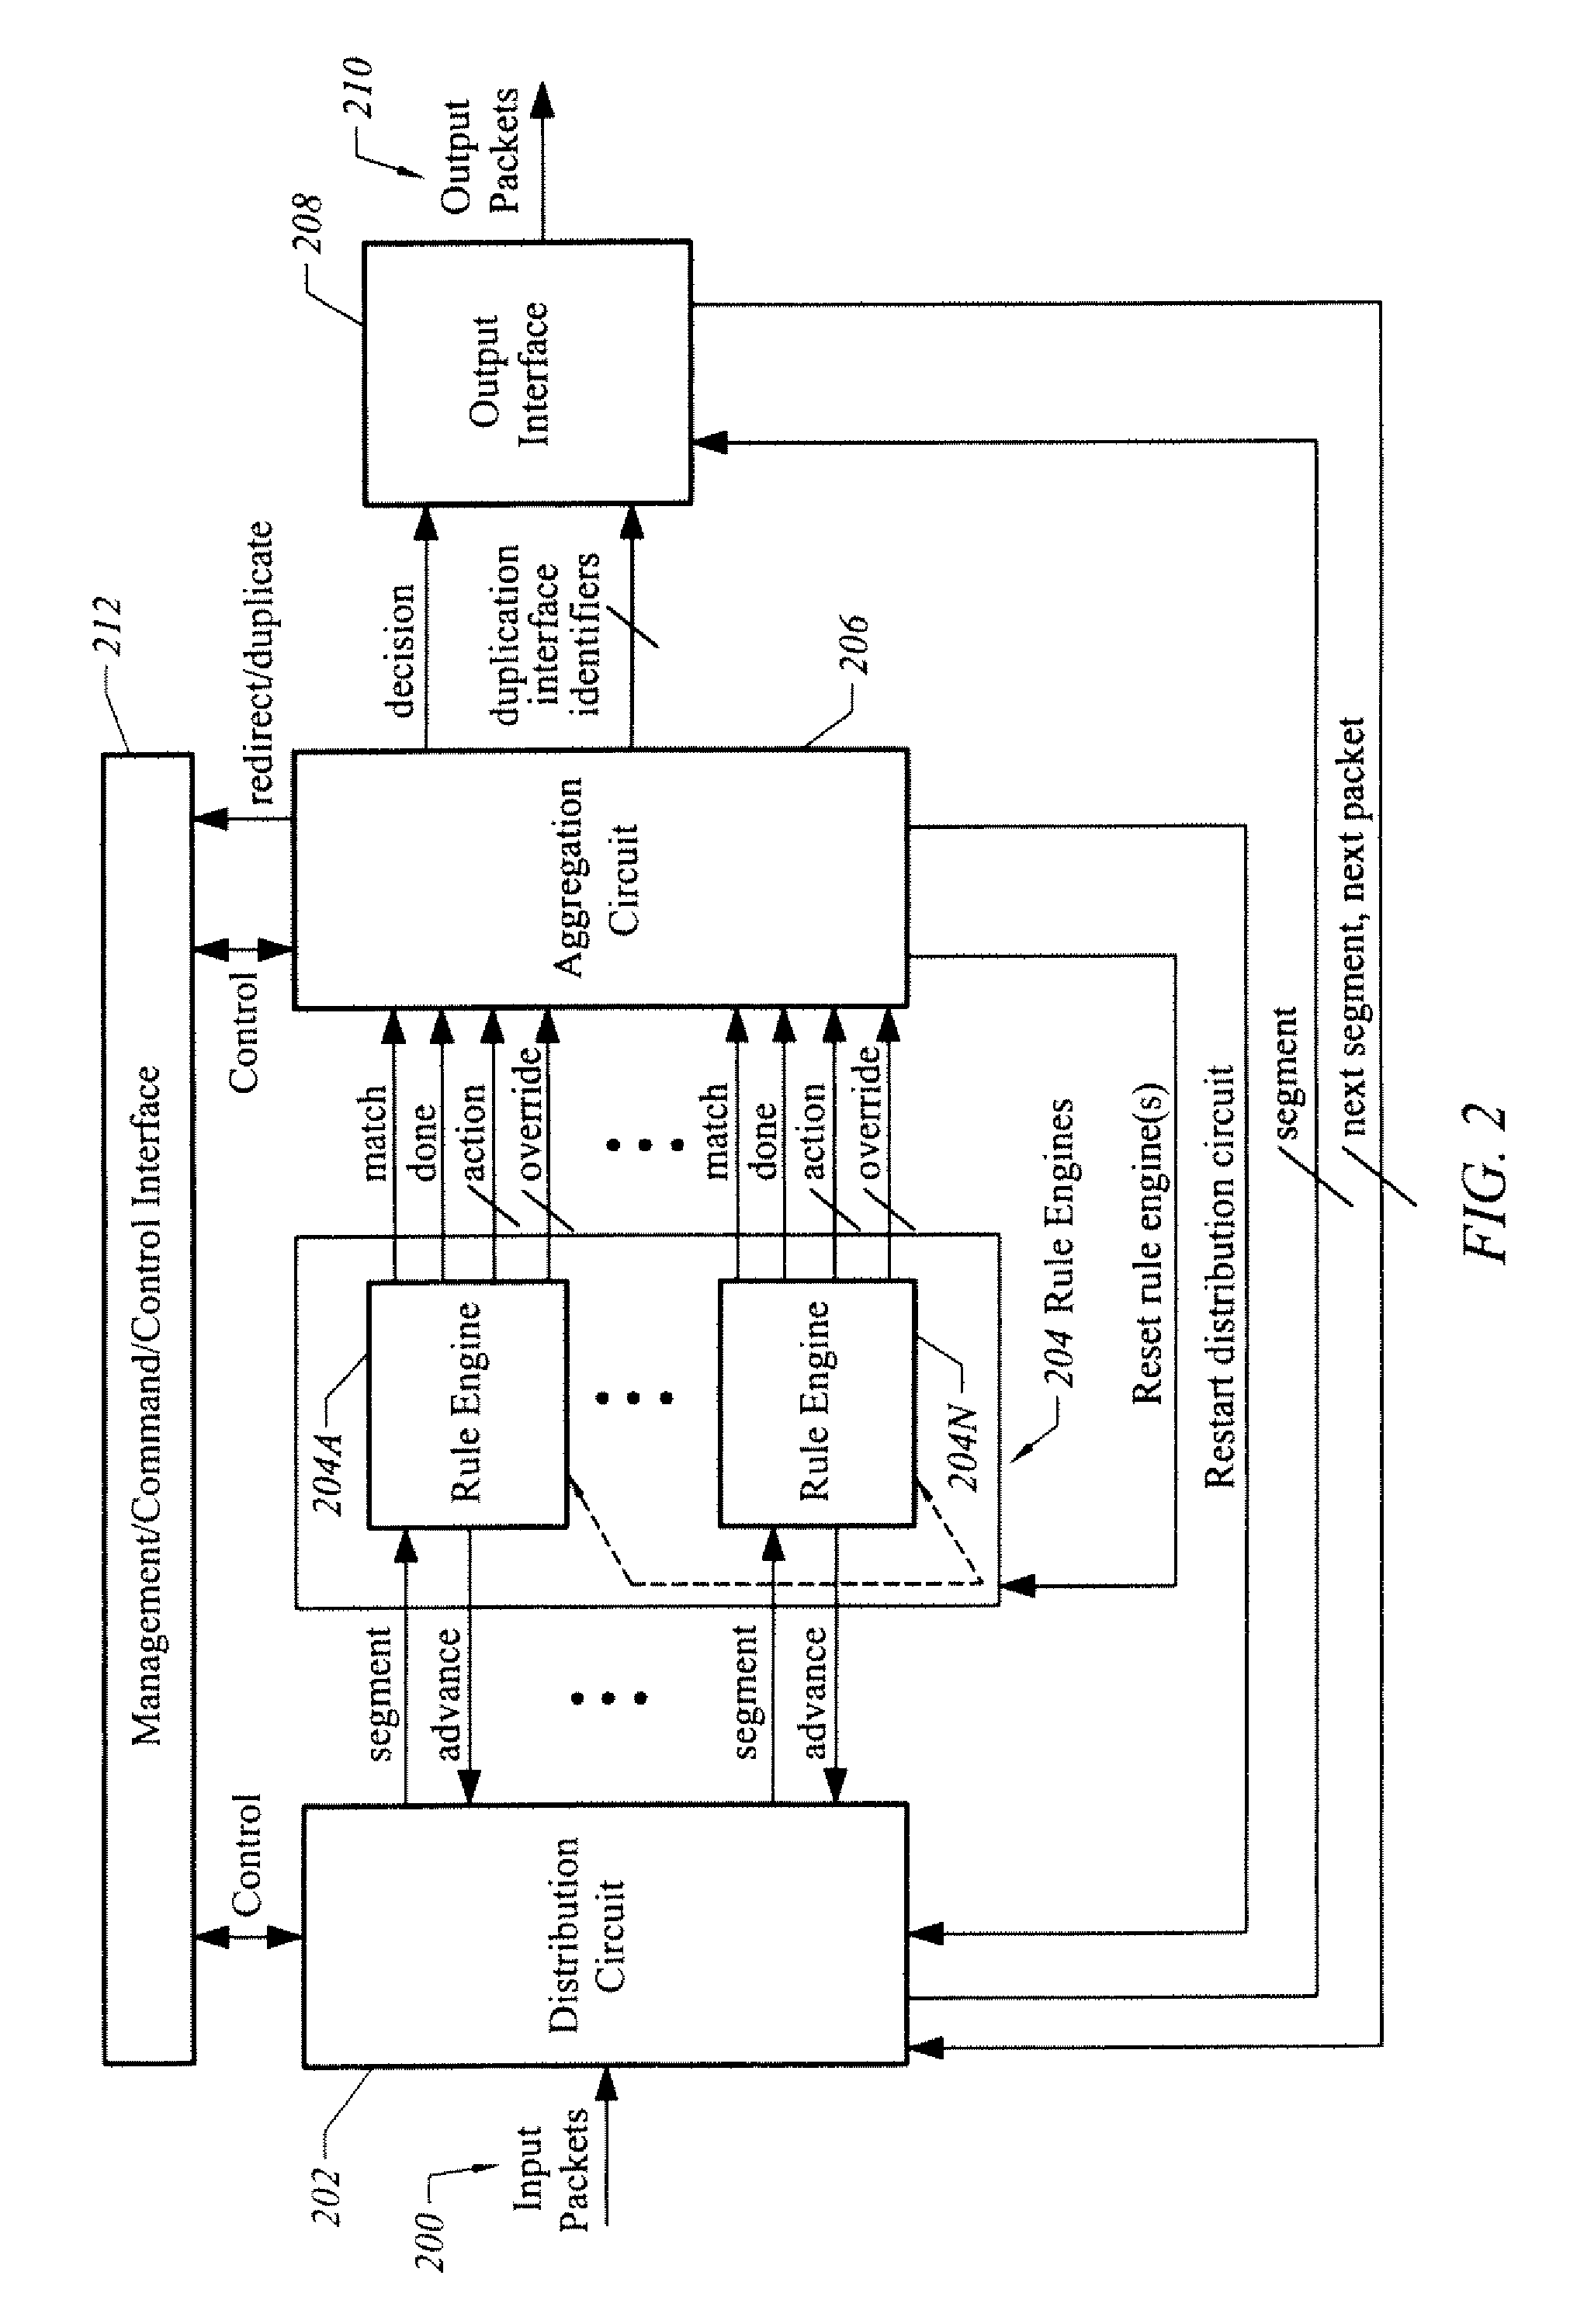 Apparatus and method for enhancing forwarding and classification of network traffic with prioritized matching and categorization